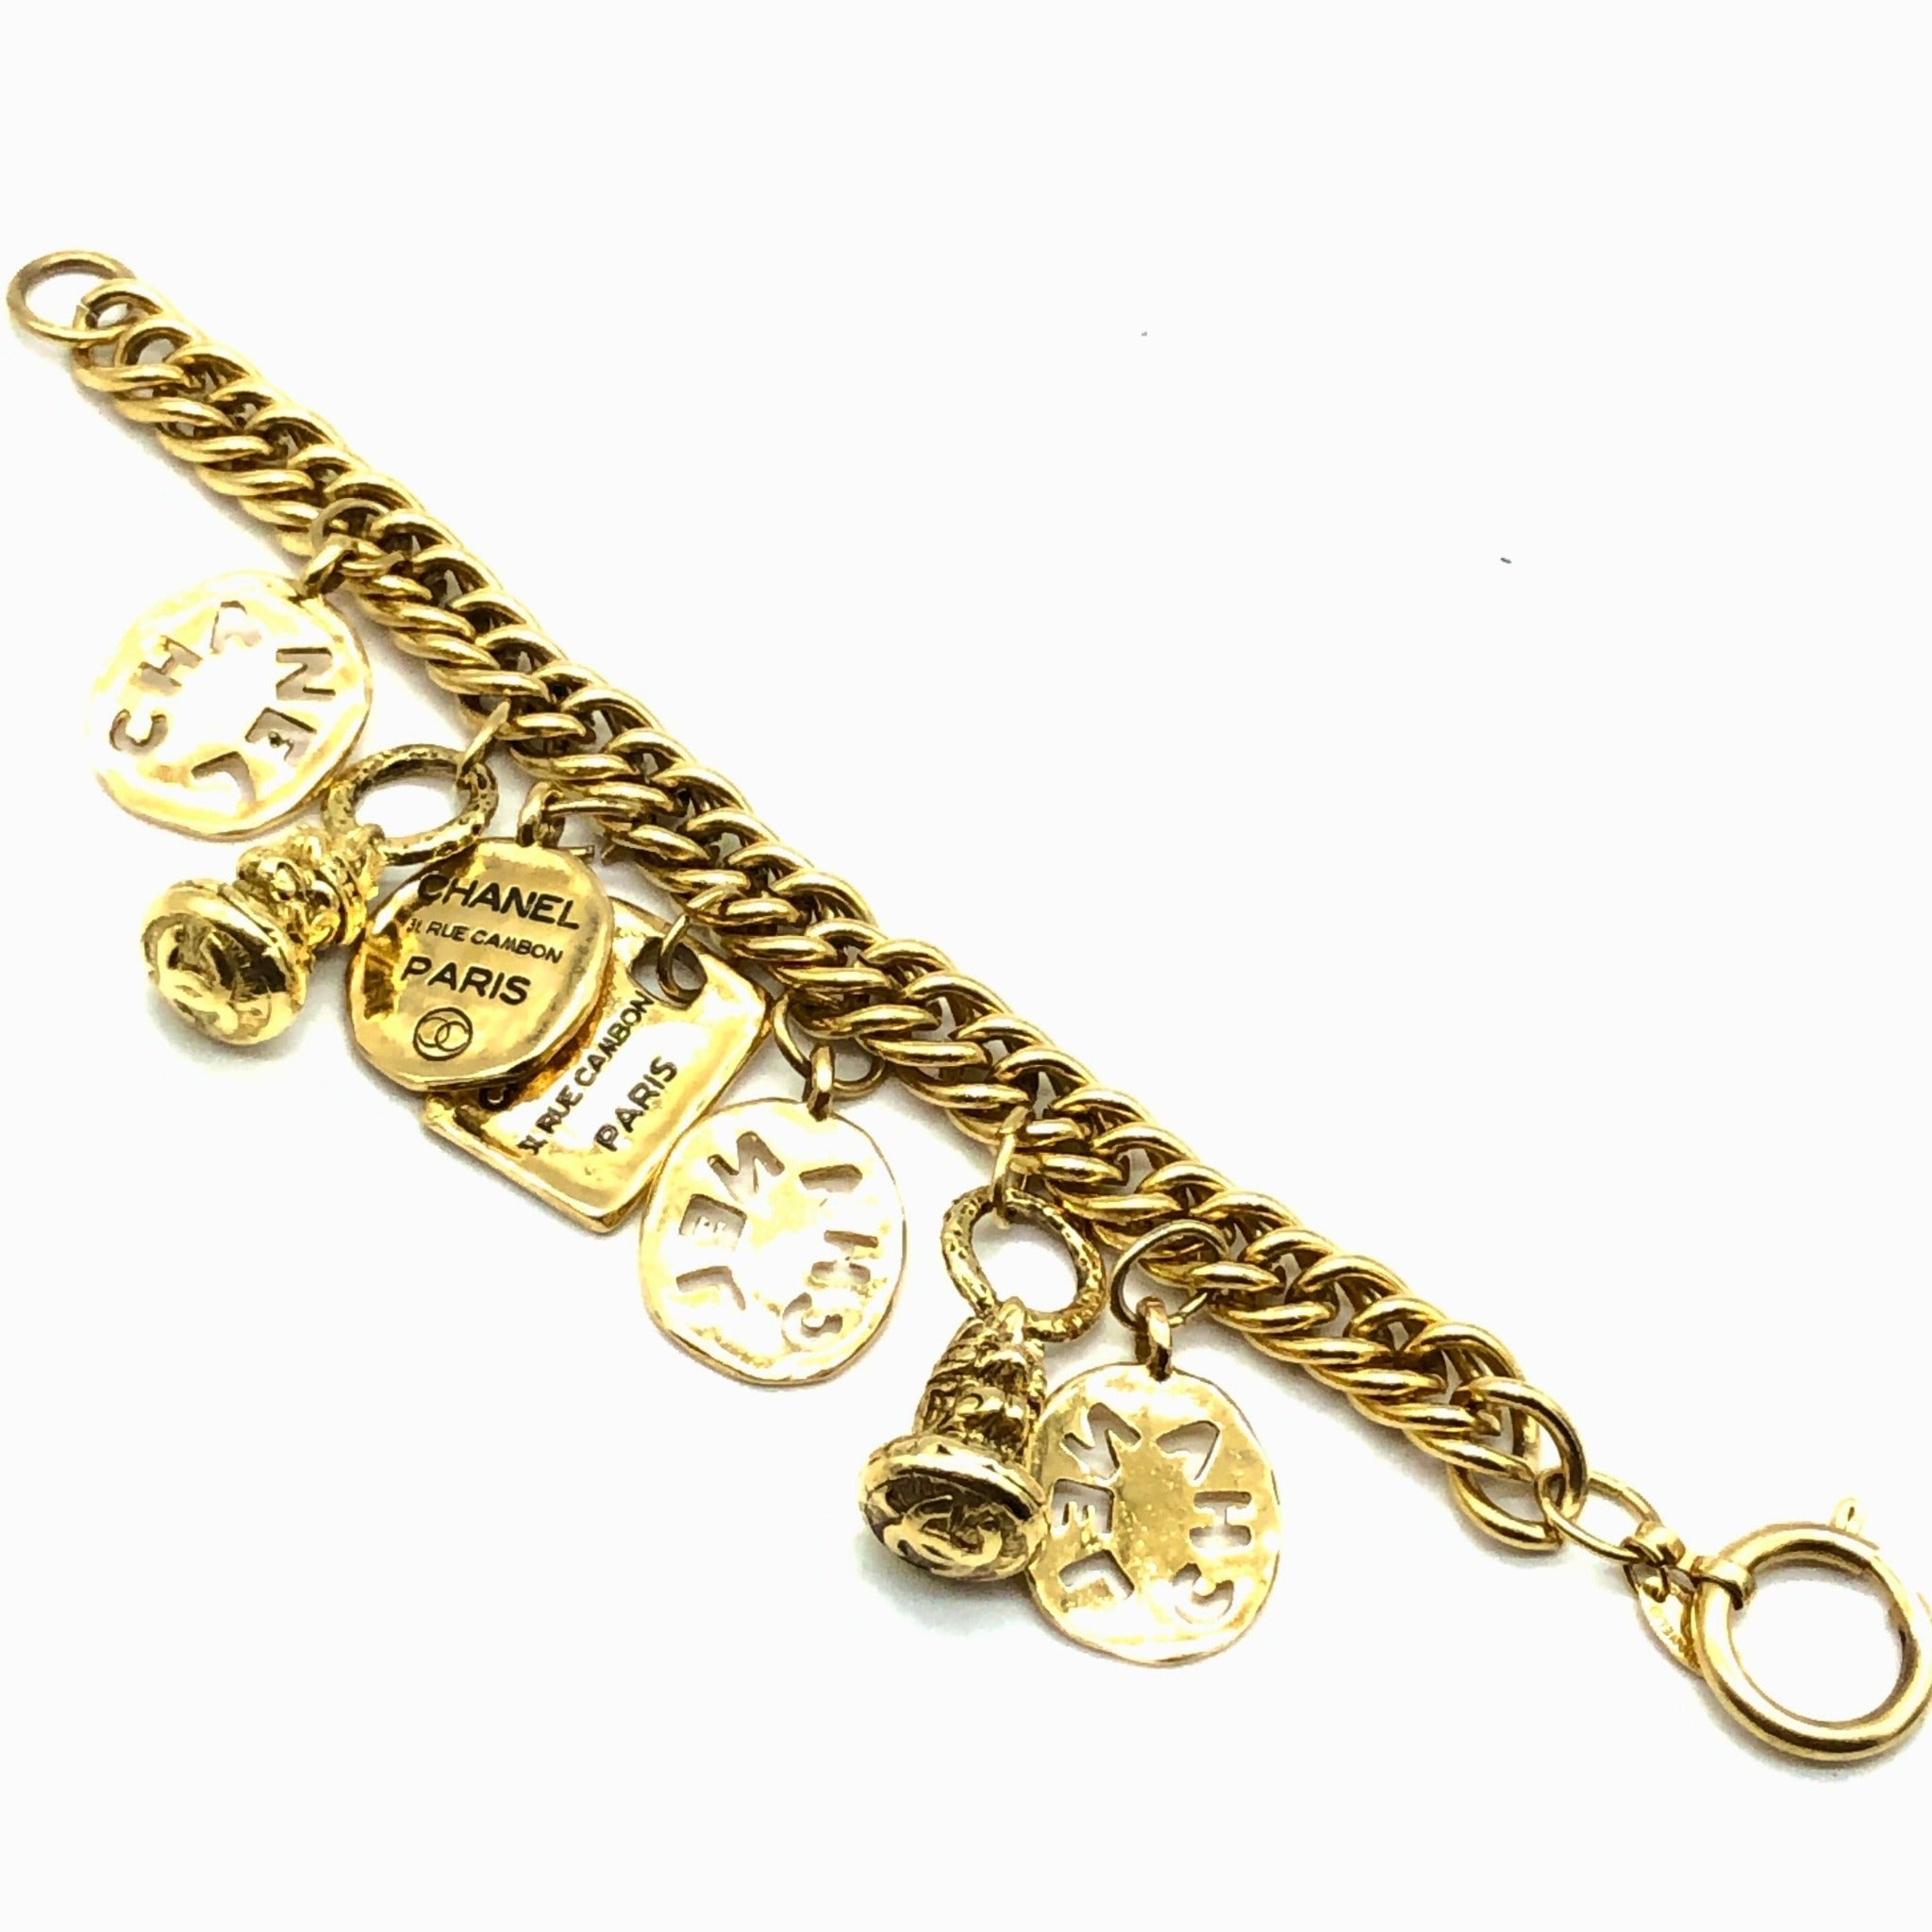 Vintage Chanel Charm Bracelet with Seal Charms – Very Vintage